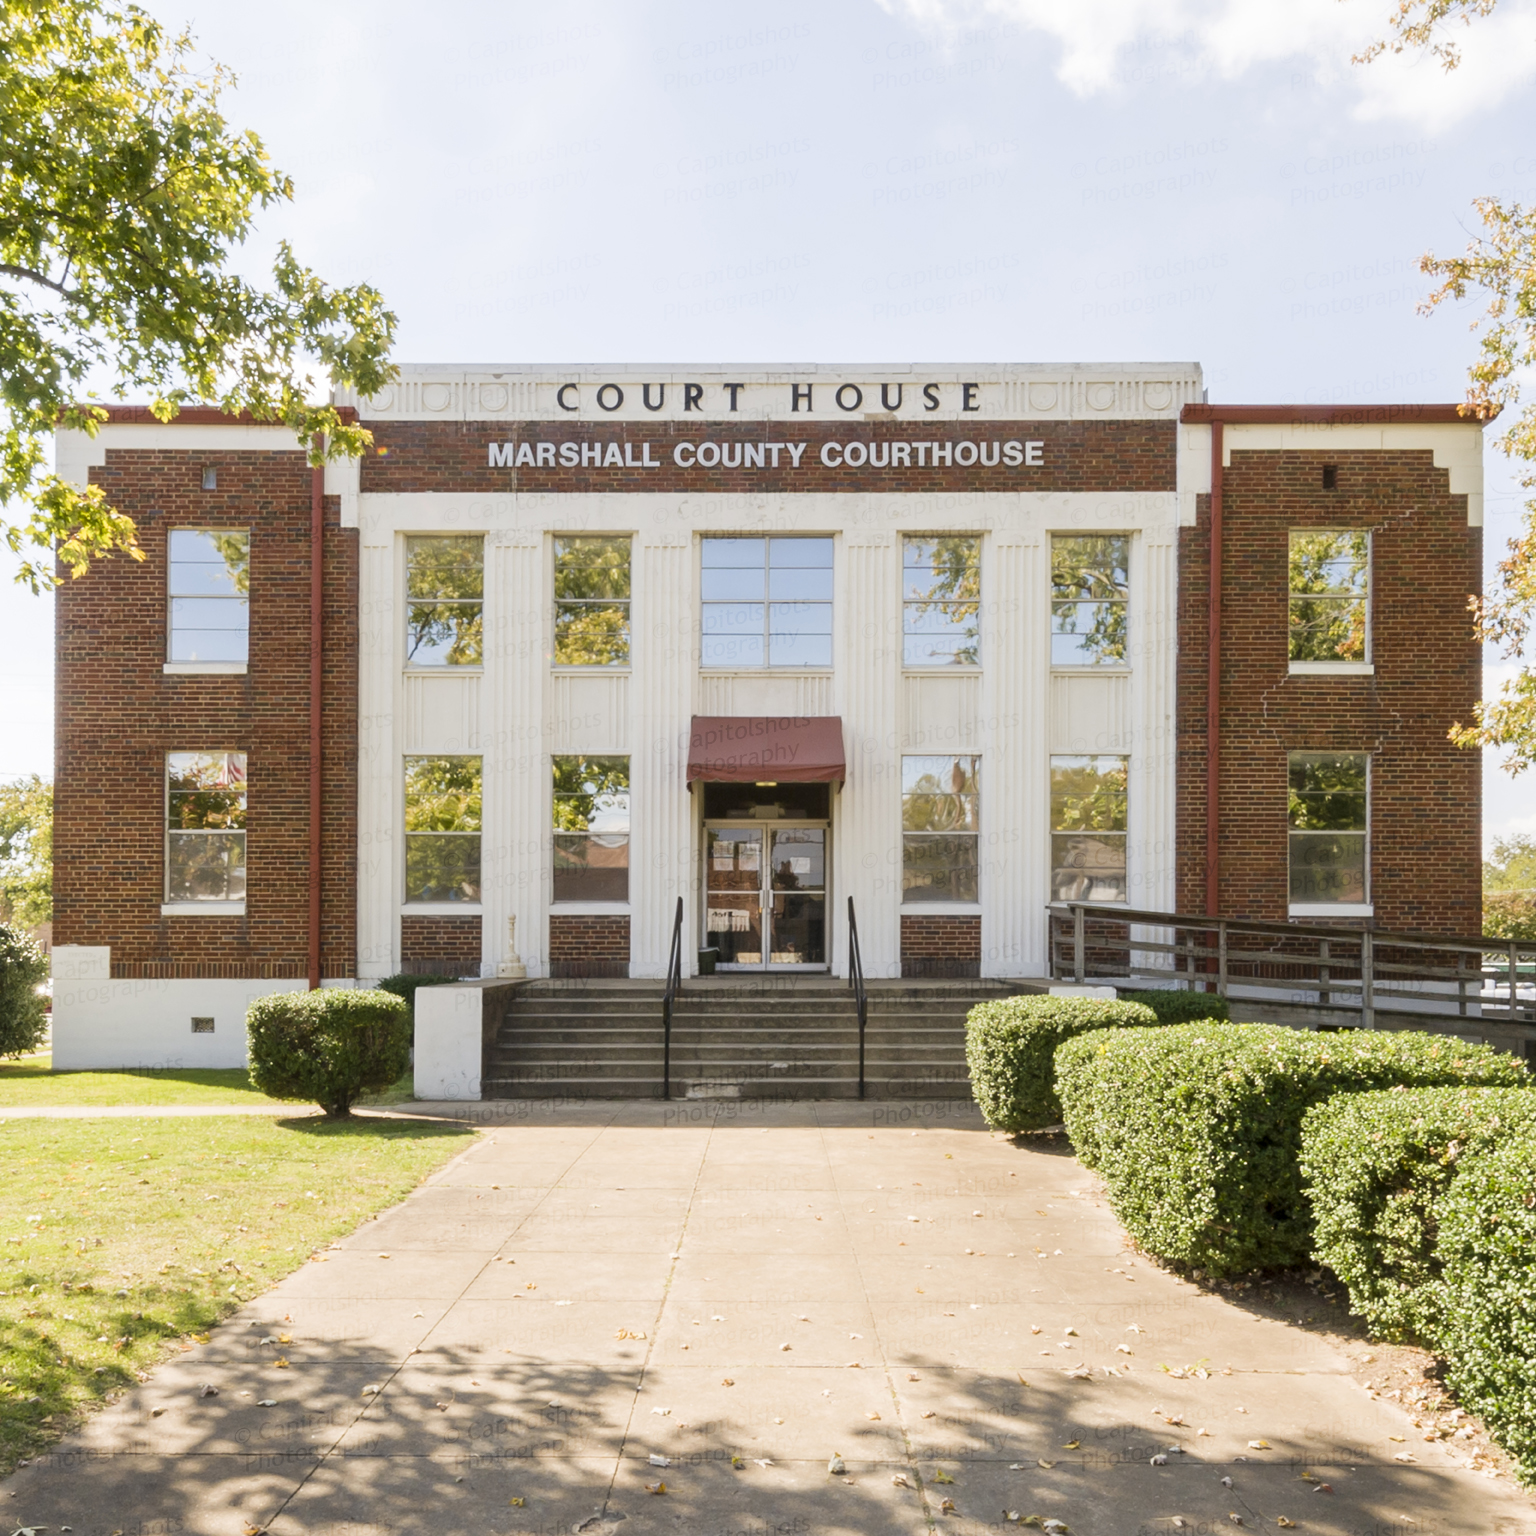 Marshall County Courthouse (Albertville Alabama) Stock Images Photos